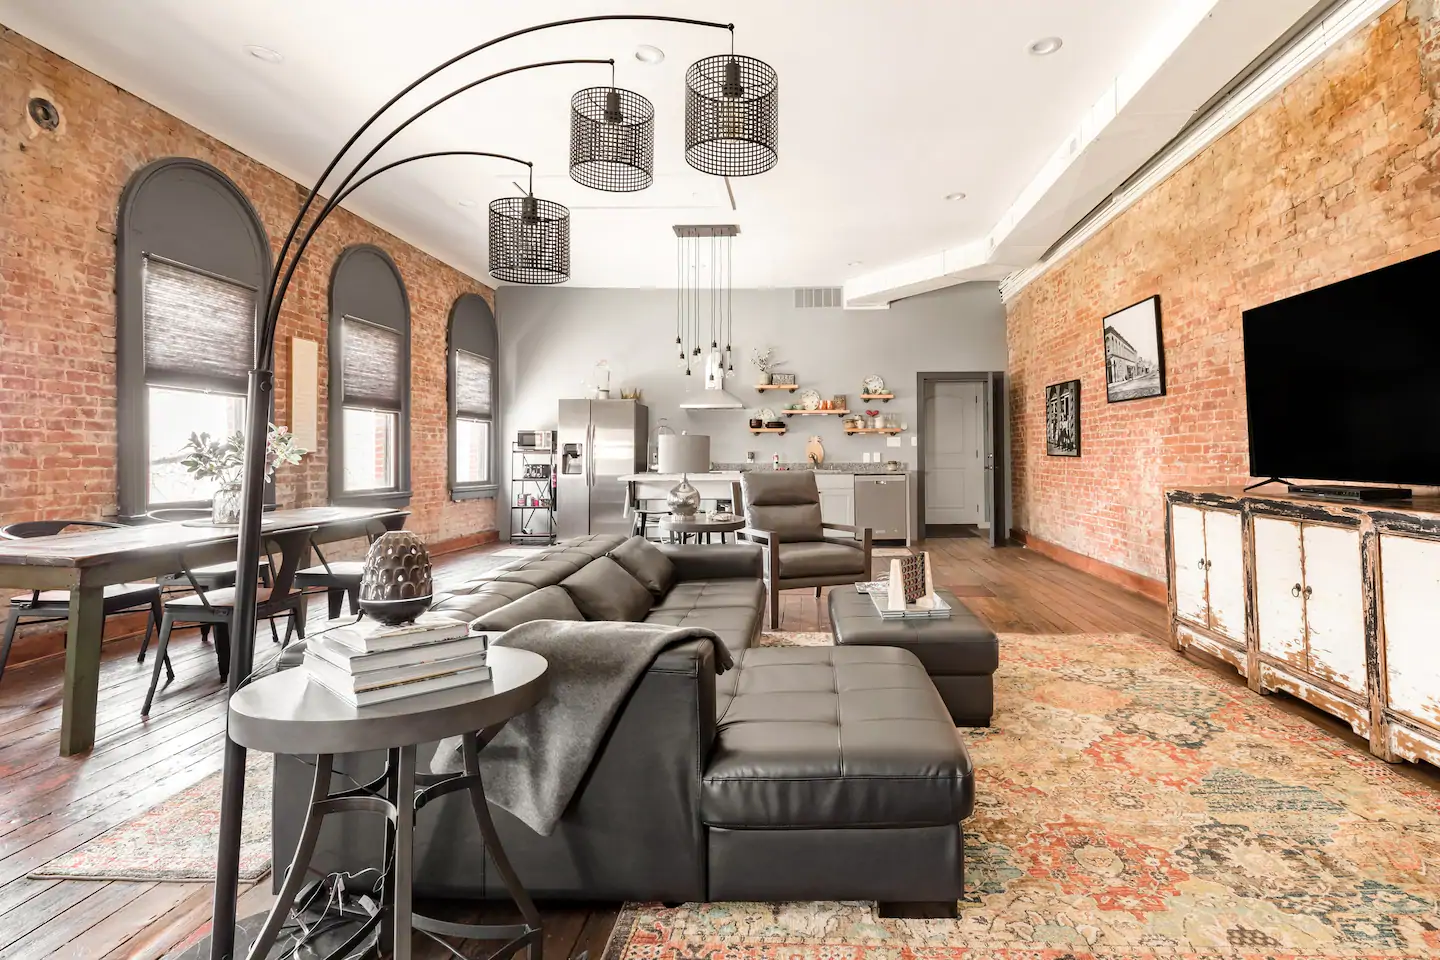 Queenie's Loft is one of the more modern Airbnbs in Kansas.